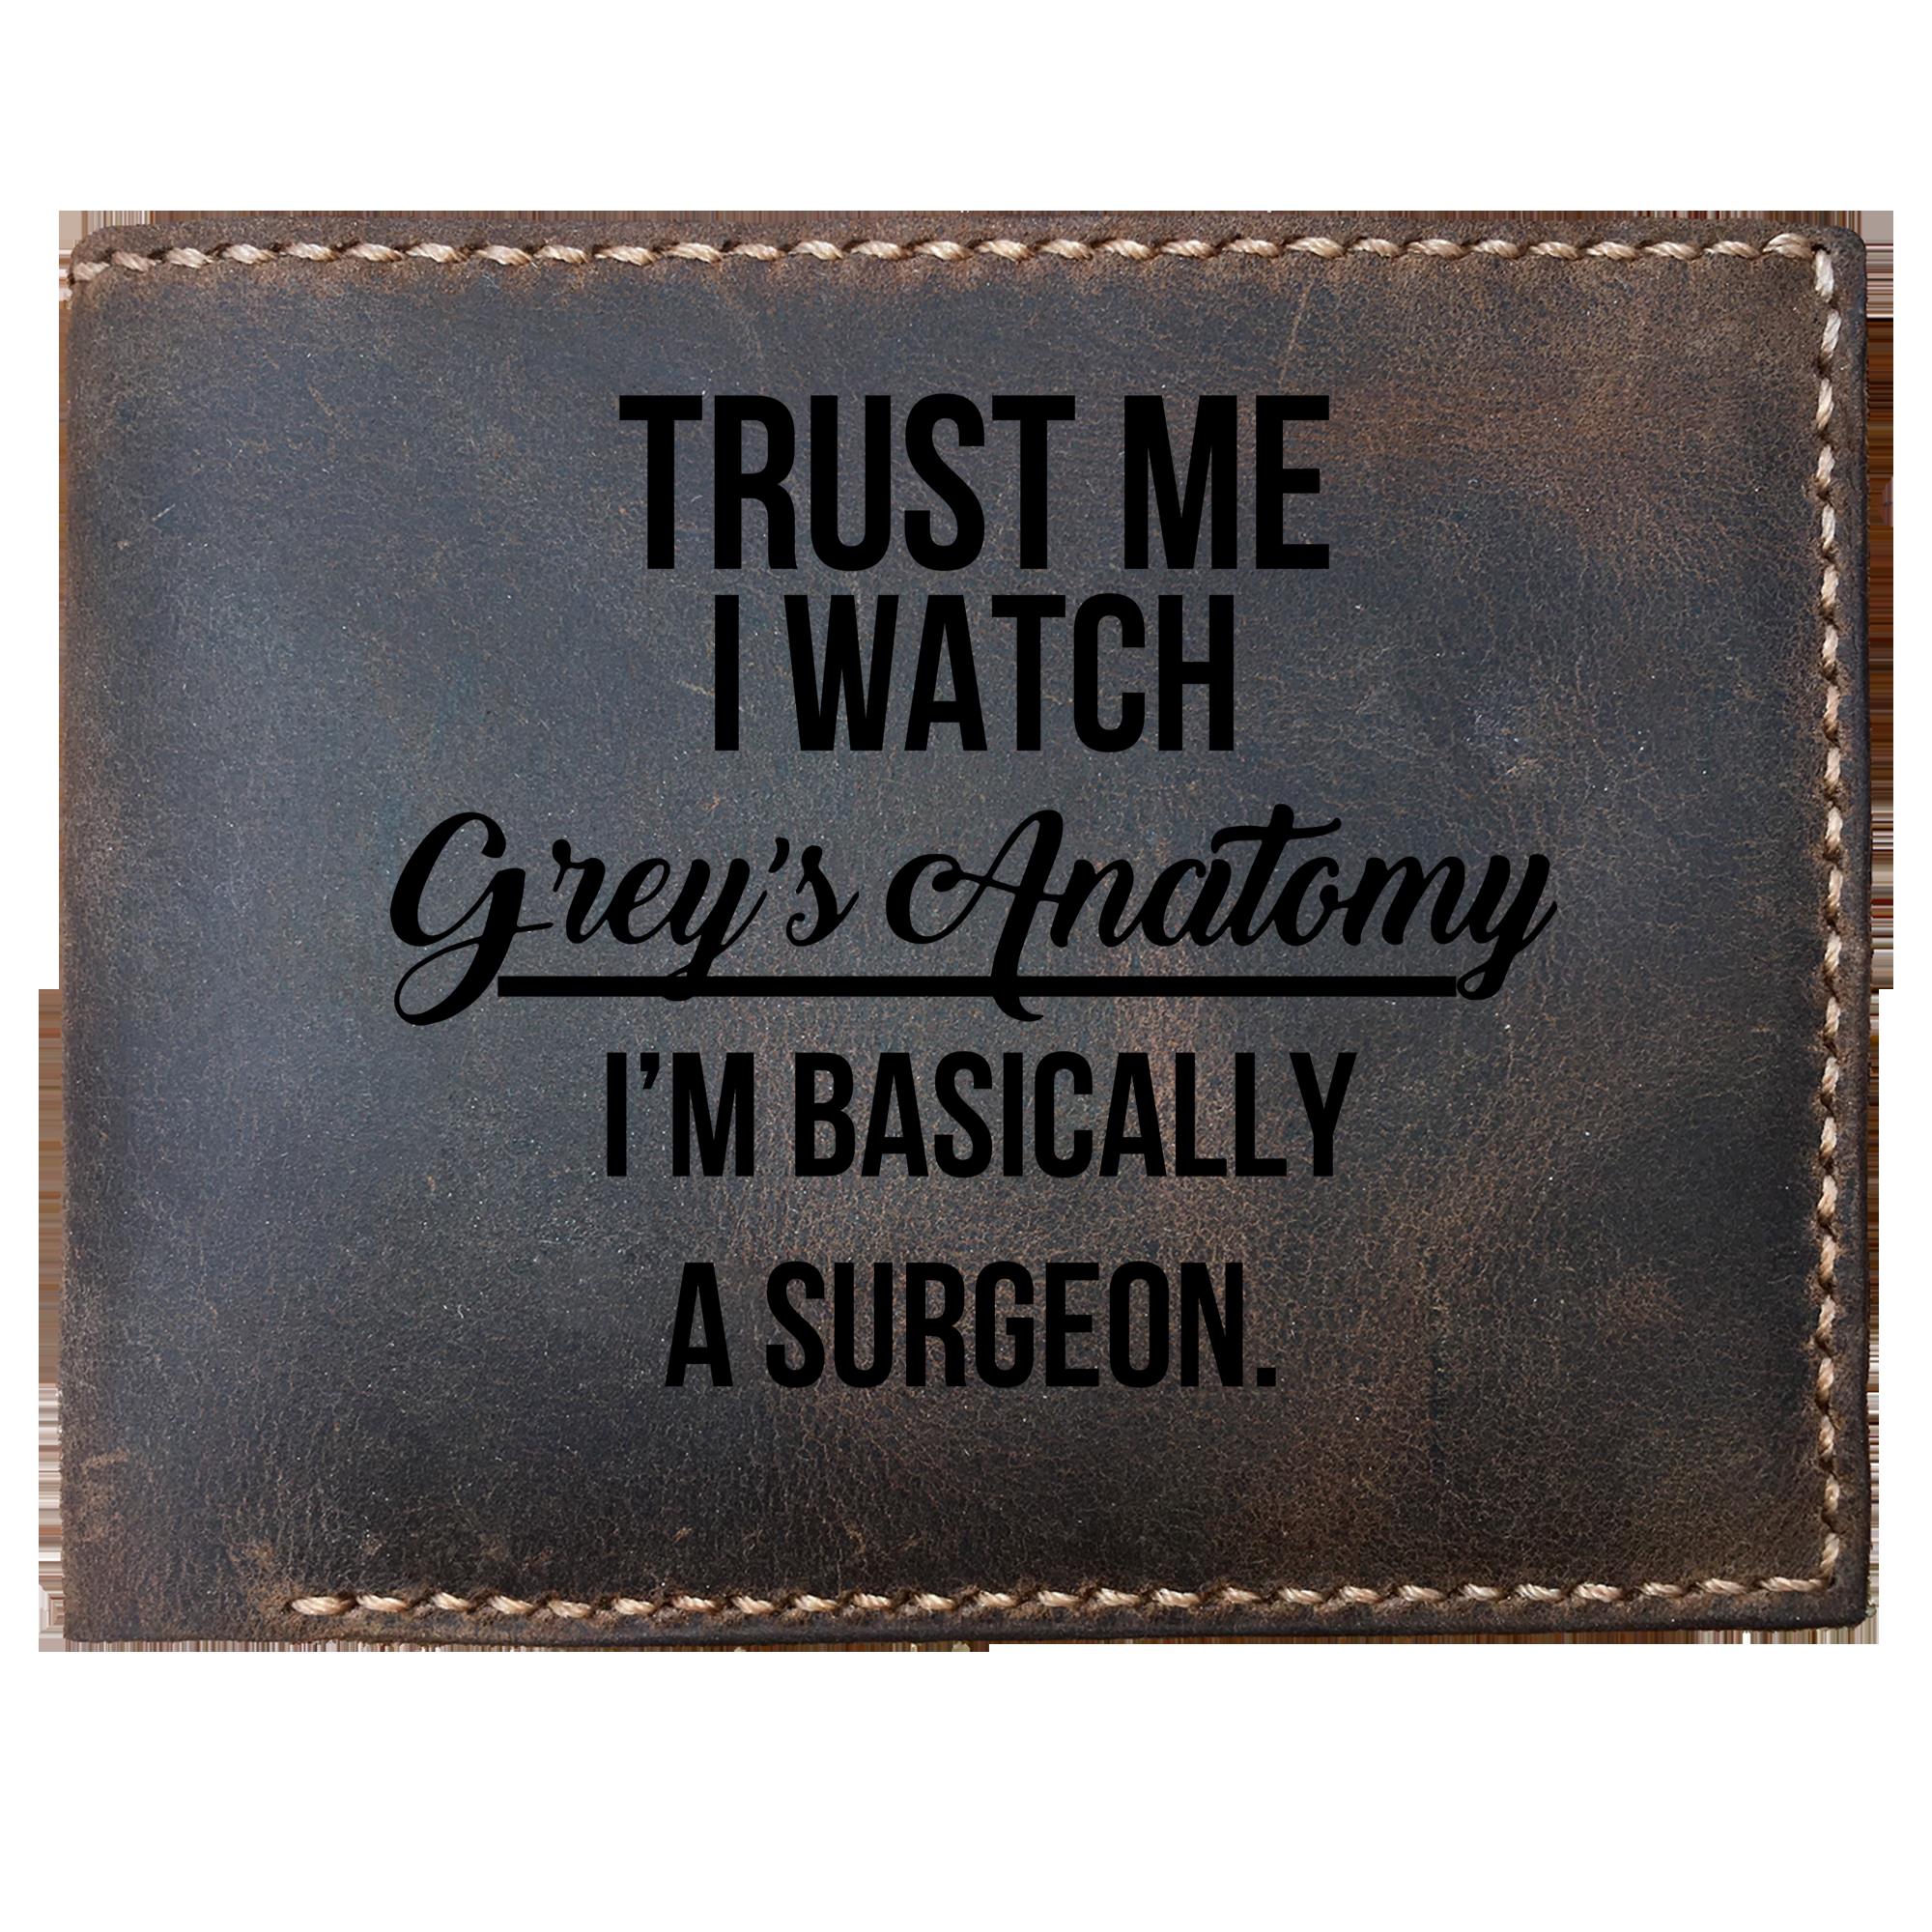 Skitongifts Funny Custom Laser Engraved Bifold Leather Wallet For Men, Trust Me I Watch Grey's Anatomy Im Basically A Surgeon